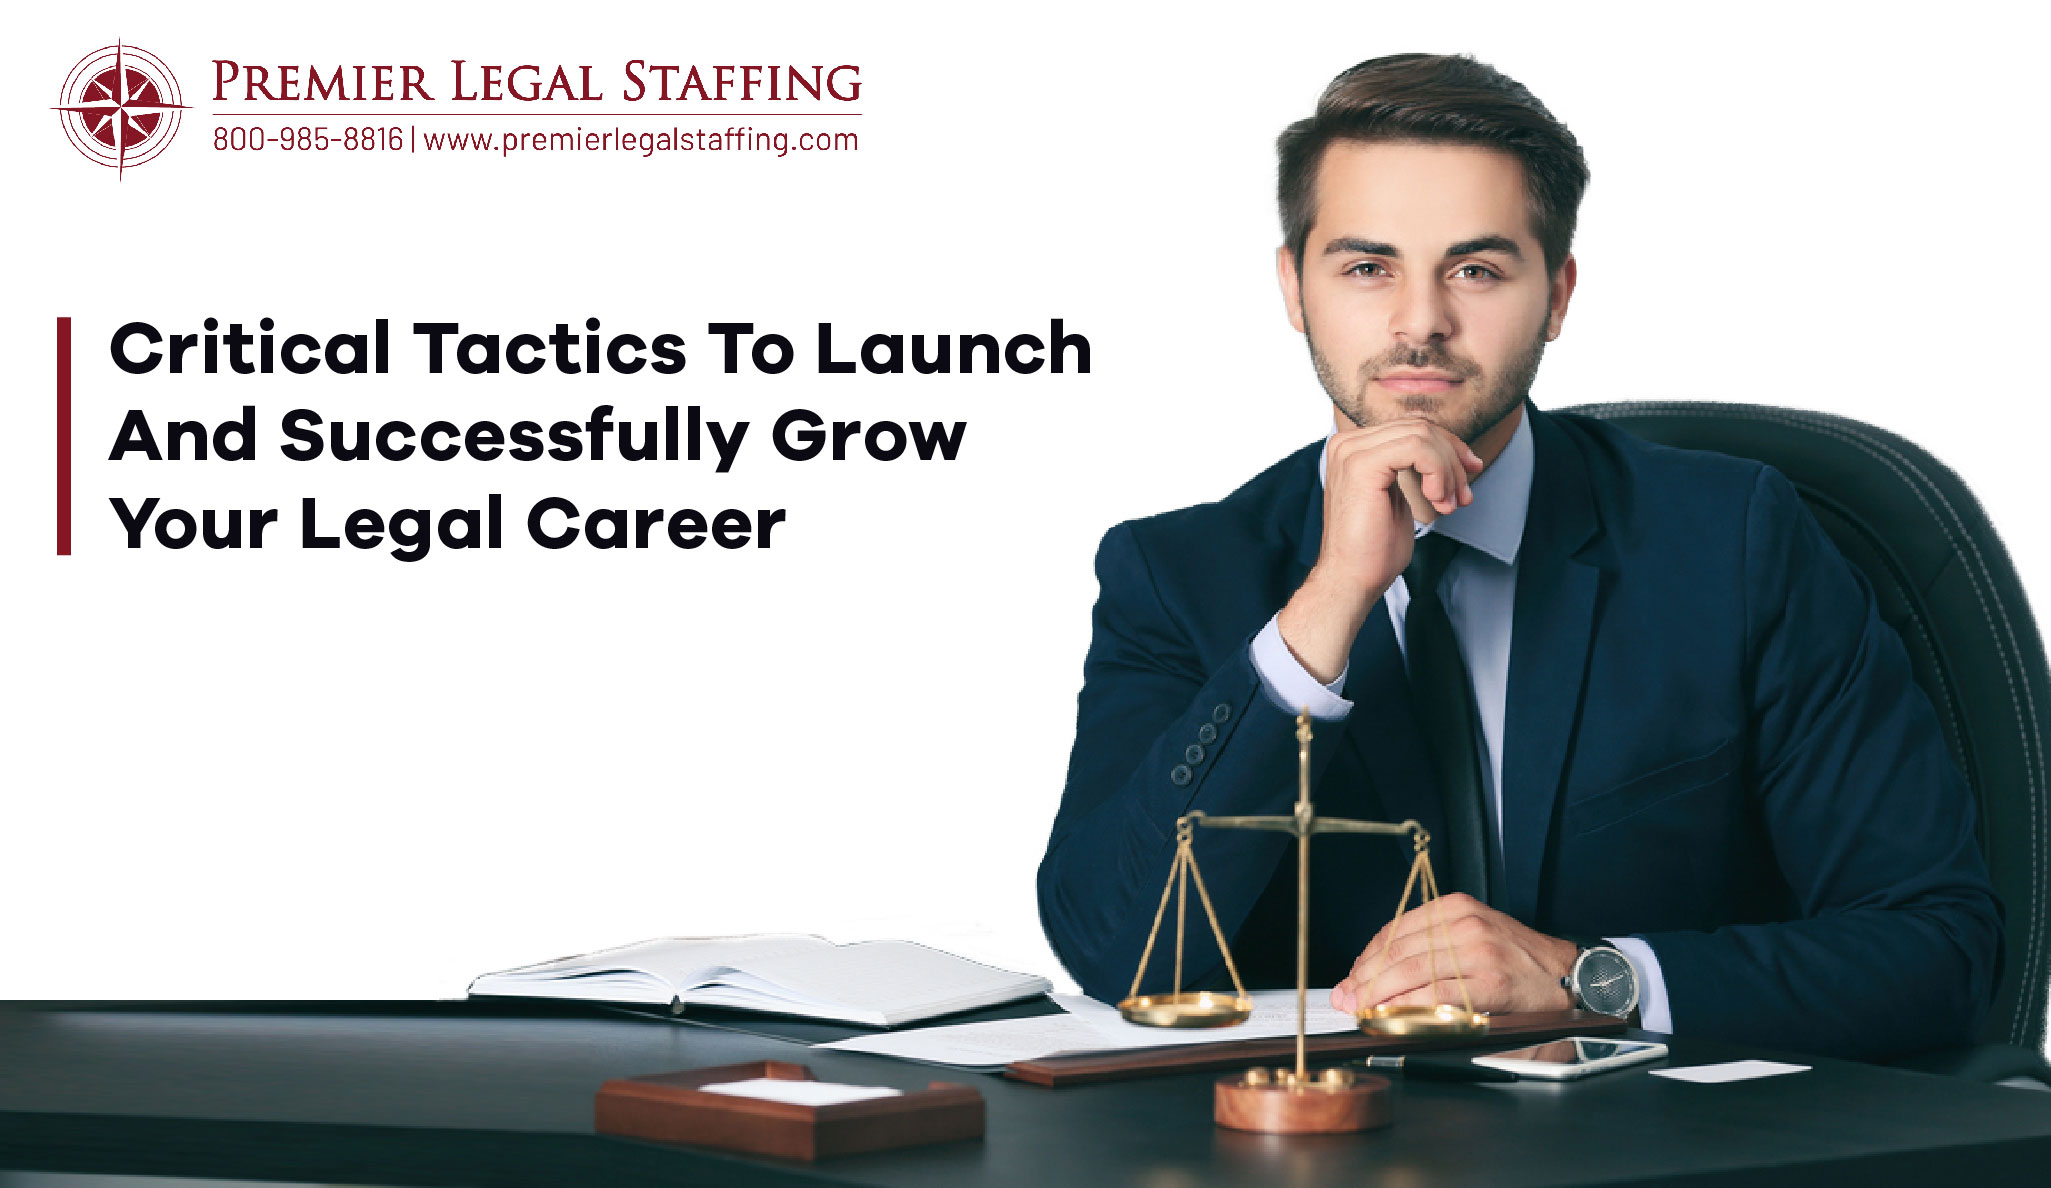 Critical Tactics To Launch And Successfully Grow Your Legal Career